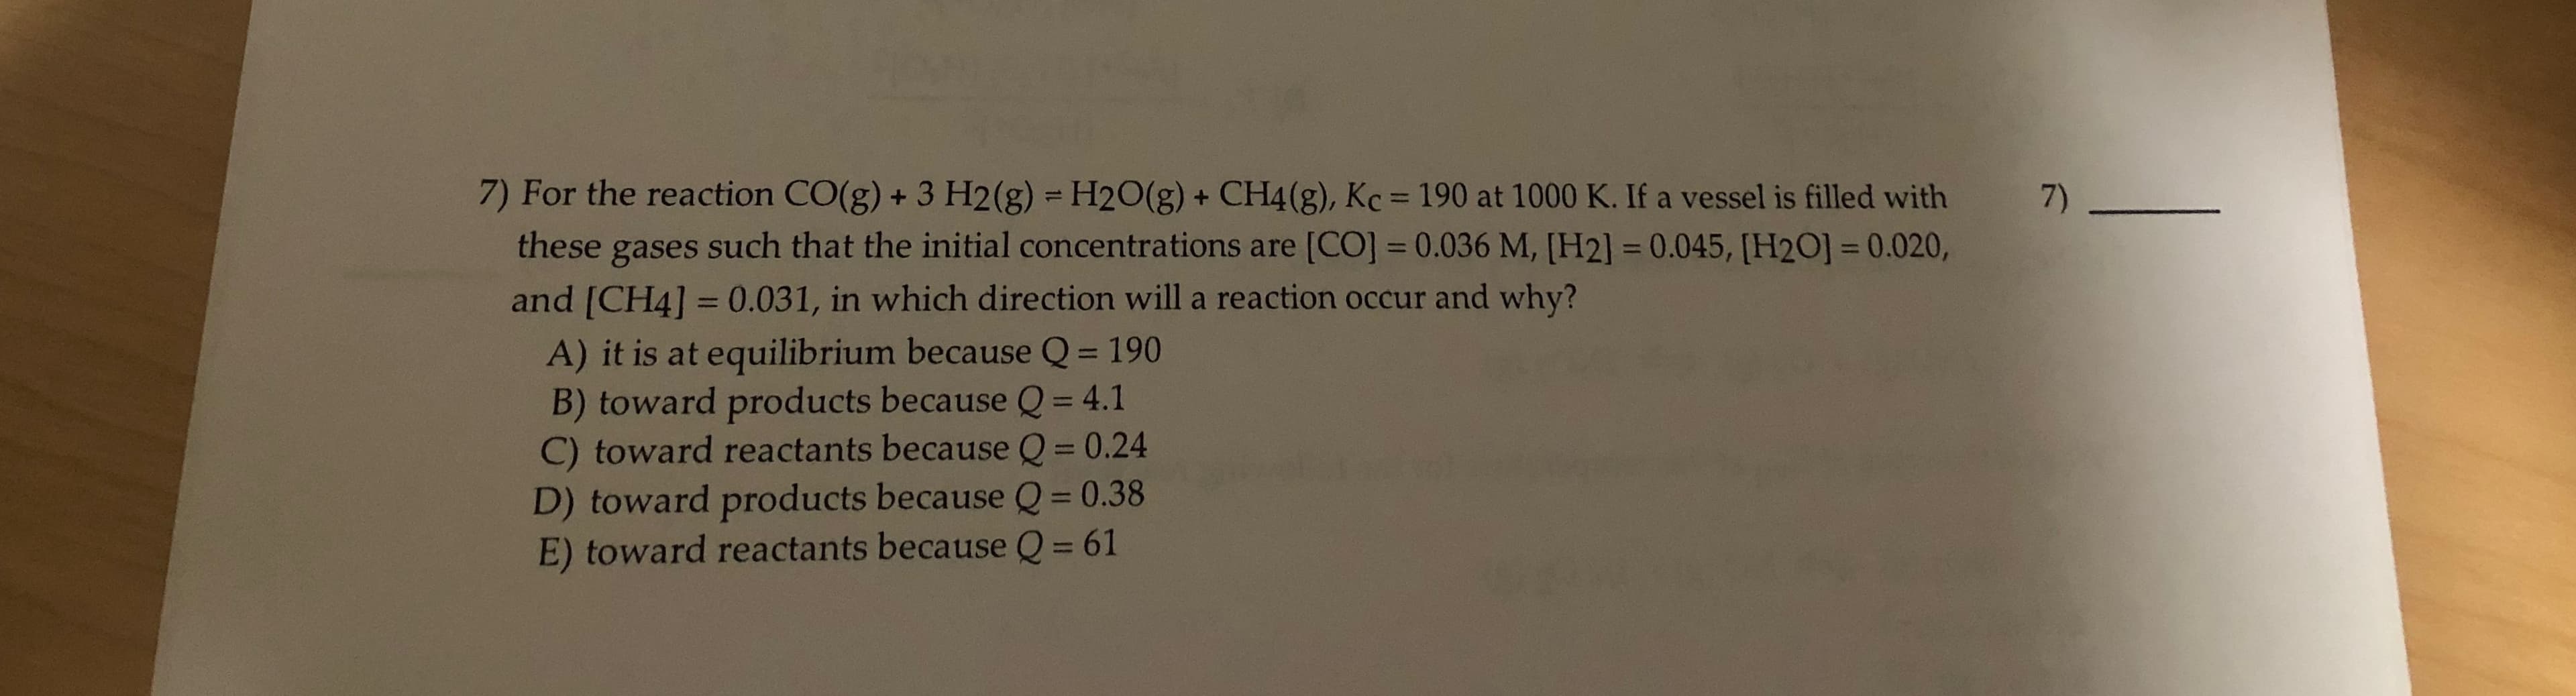 7) For the reaction CO(g) + 3 H2(g) = H2O(g) + CH4(g), Kc = 190 at 1000 K. If a vessel is filled with
these gases such that the initial concentrations are [CO] = 0.036 M, [H2] = 0.045, [H2O] = 0.020,
7)
%3D
%3D
%3D
and [CH4] = 0.031, in which direction will a reaction occur and why?
A) it is at equilibrium because Q = 190
B) toward products because Q = 4.1
C) toward reactants because Q = 0.24
D) toward products because Q = 0.38
%3D
%3D
%3D
%3D
E) toward reactants because Q = 61
%3D
